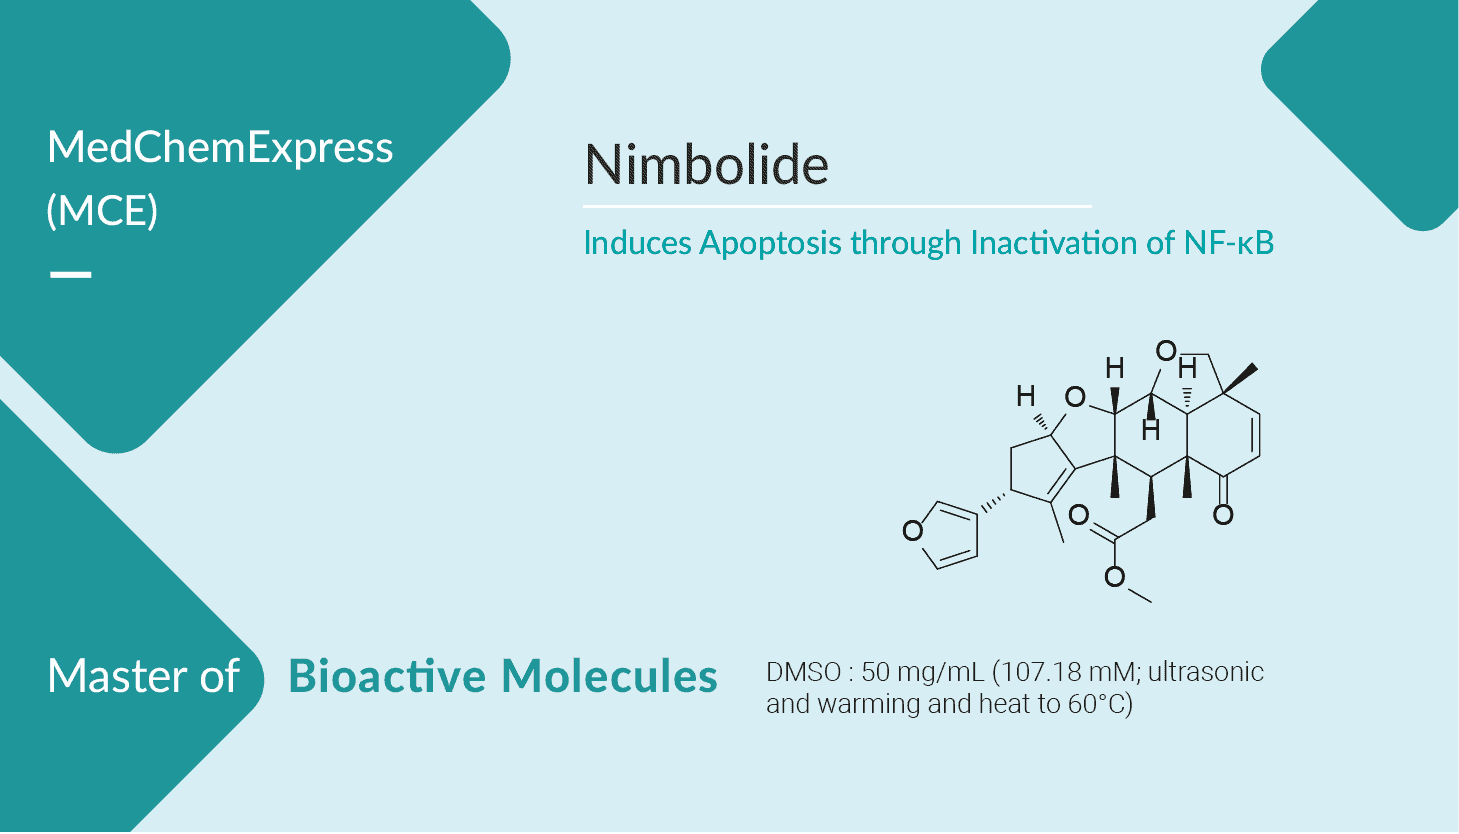 Nimbolide - Nimbolide Induces Apoptosis through Inactivation of NF-κB